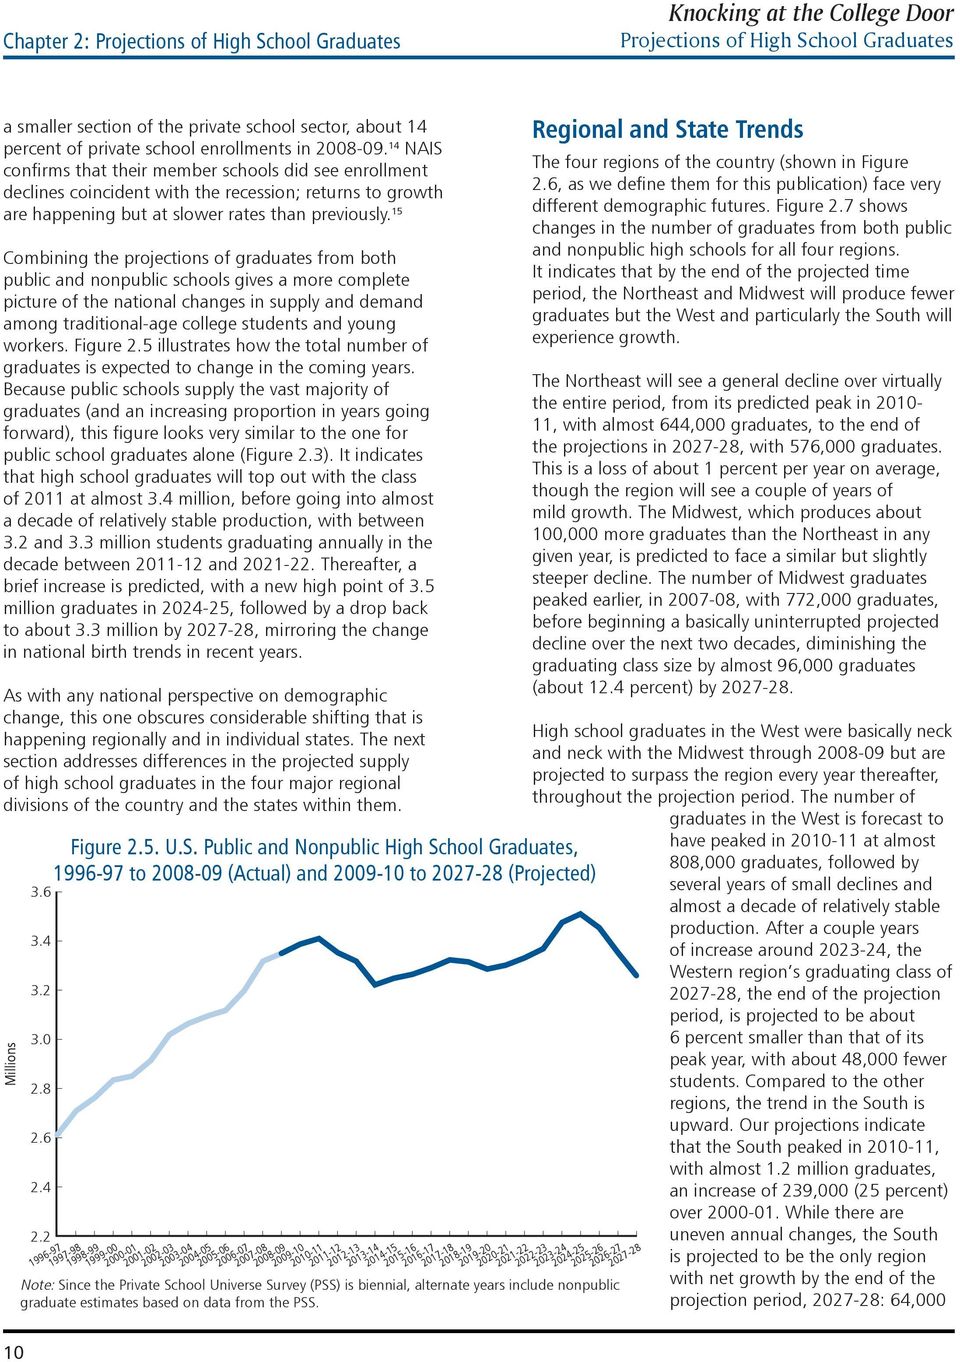 15 Combining the projections of graduates from both public and nonpublic schools gives a more complete picture of the national changes in supply and demand among traditional-age college students and